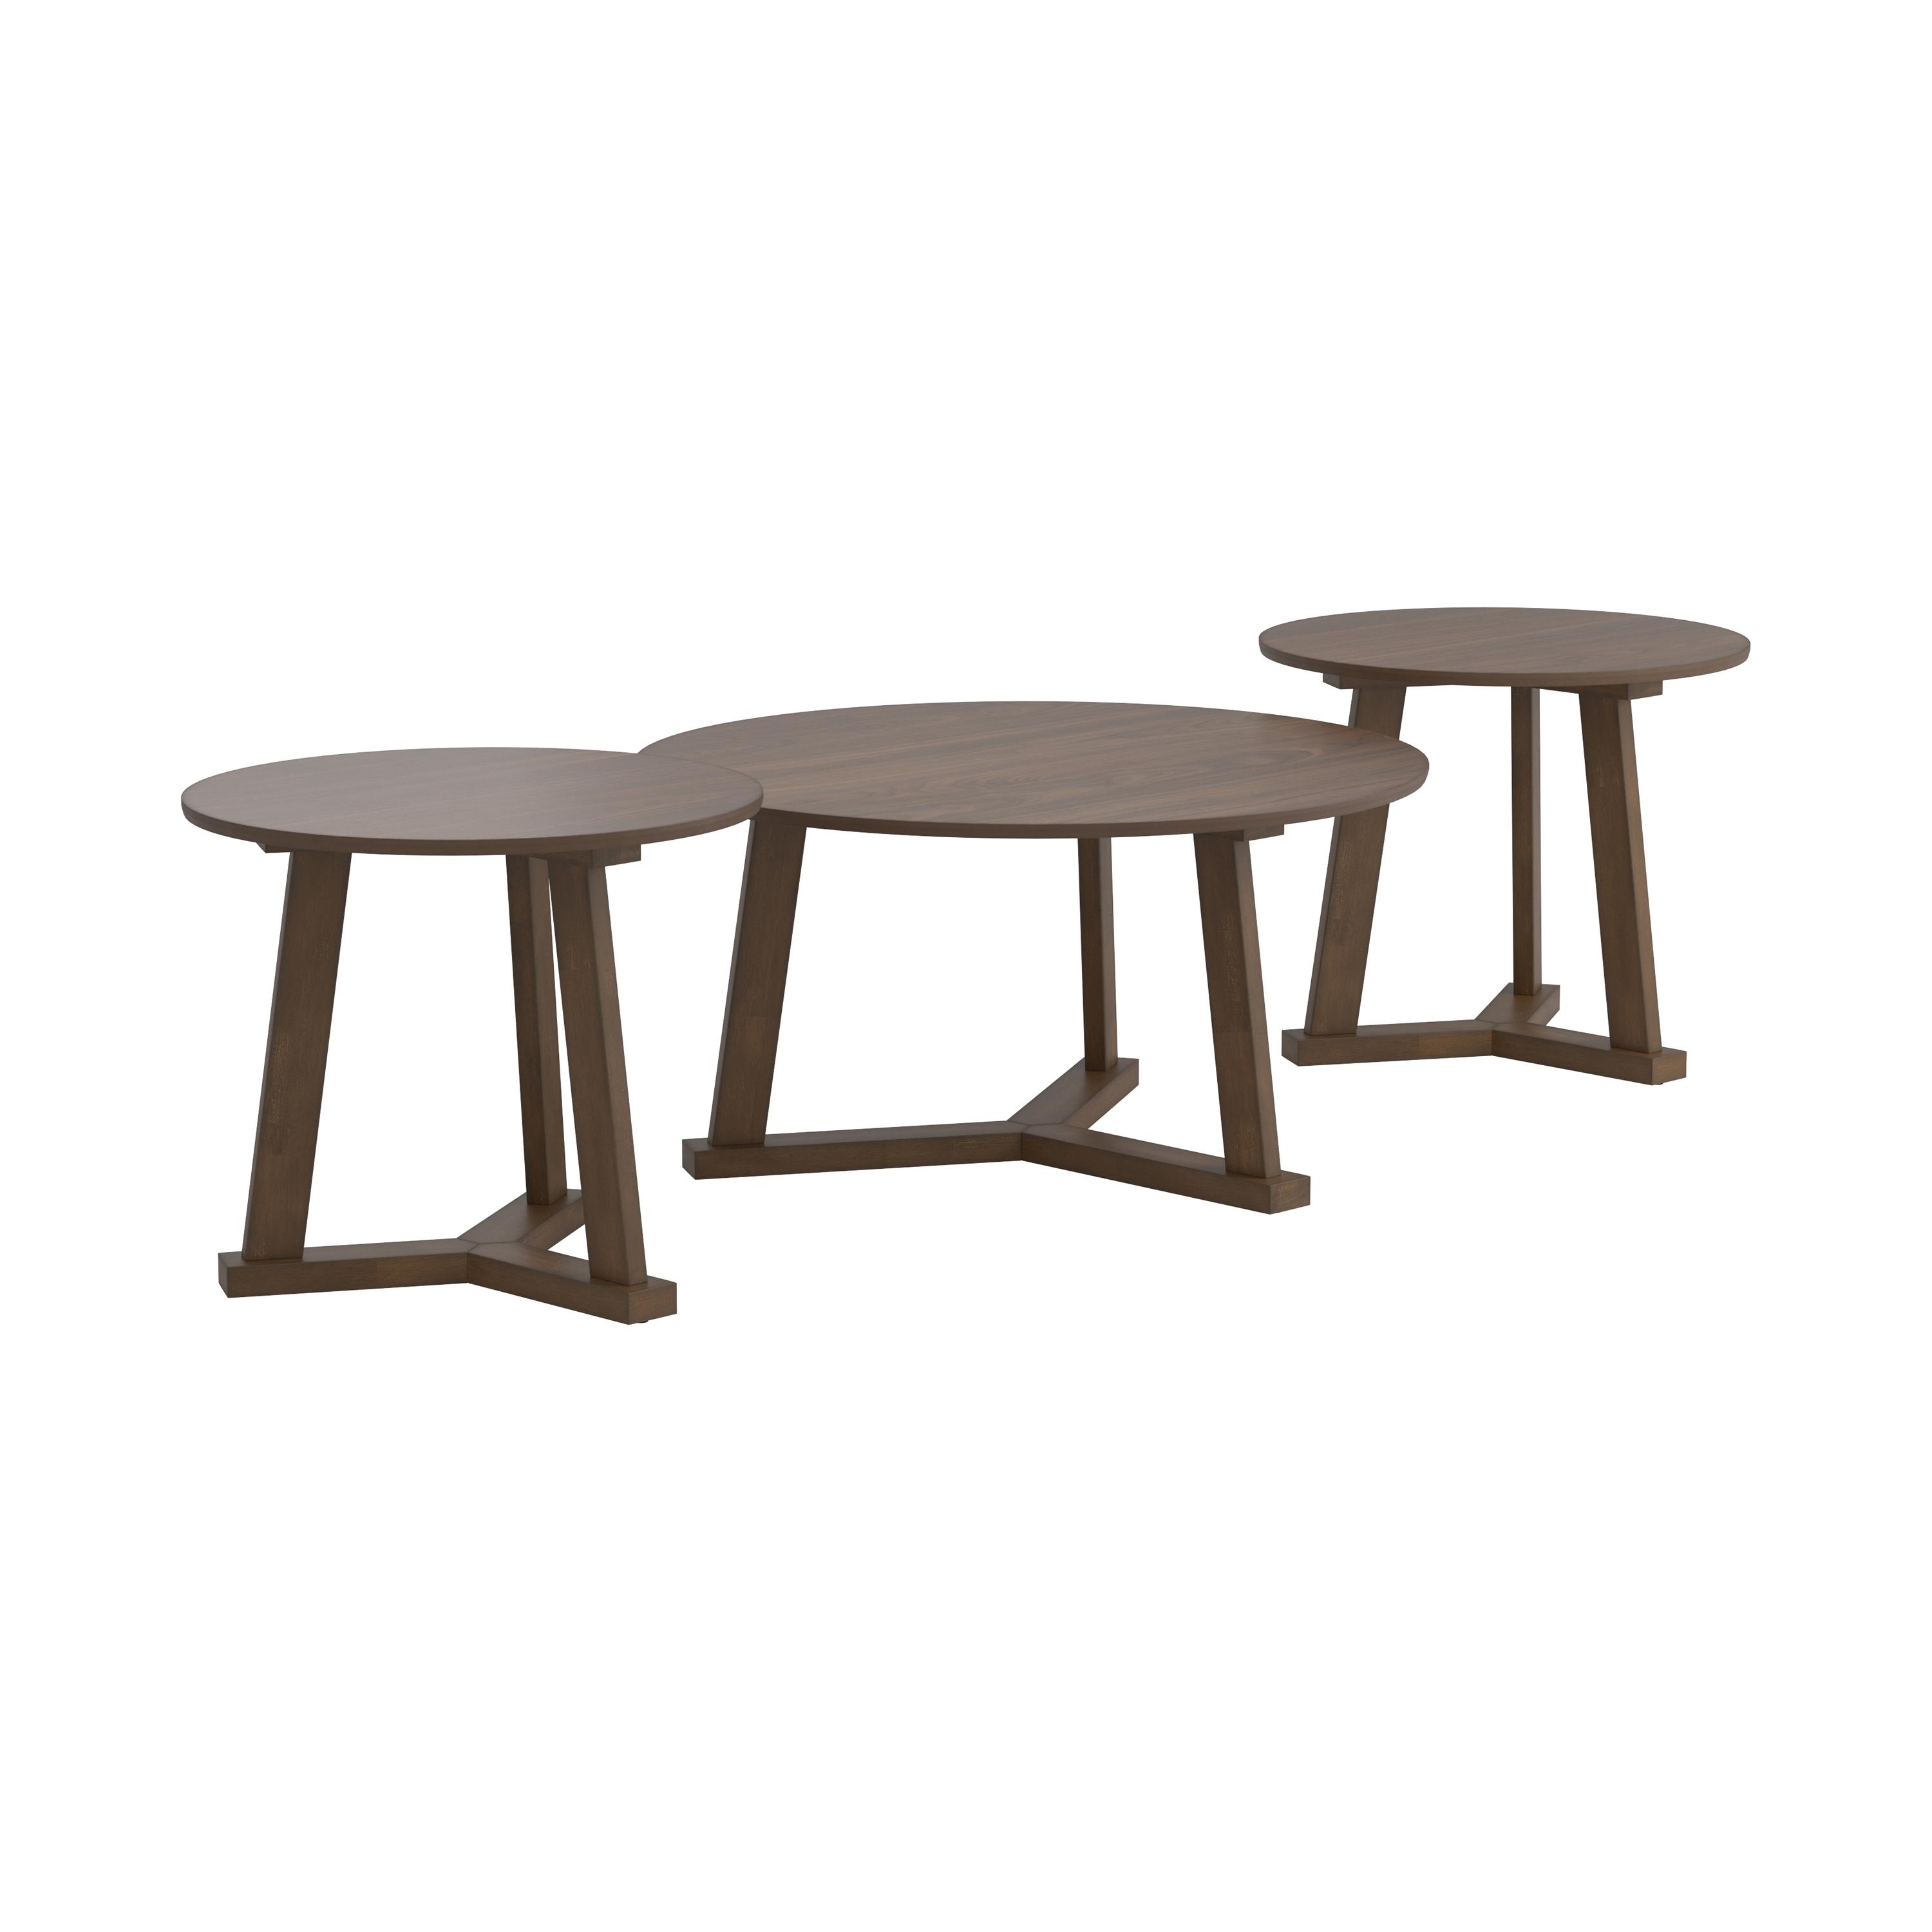 Transitional Coffee Table Set 722720 722720 in Walnut 